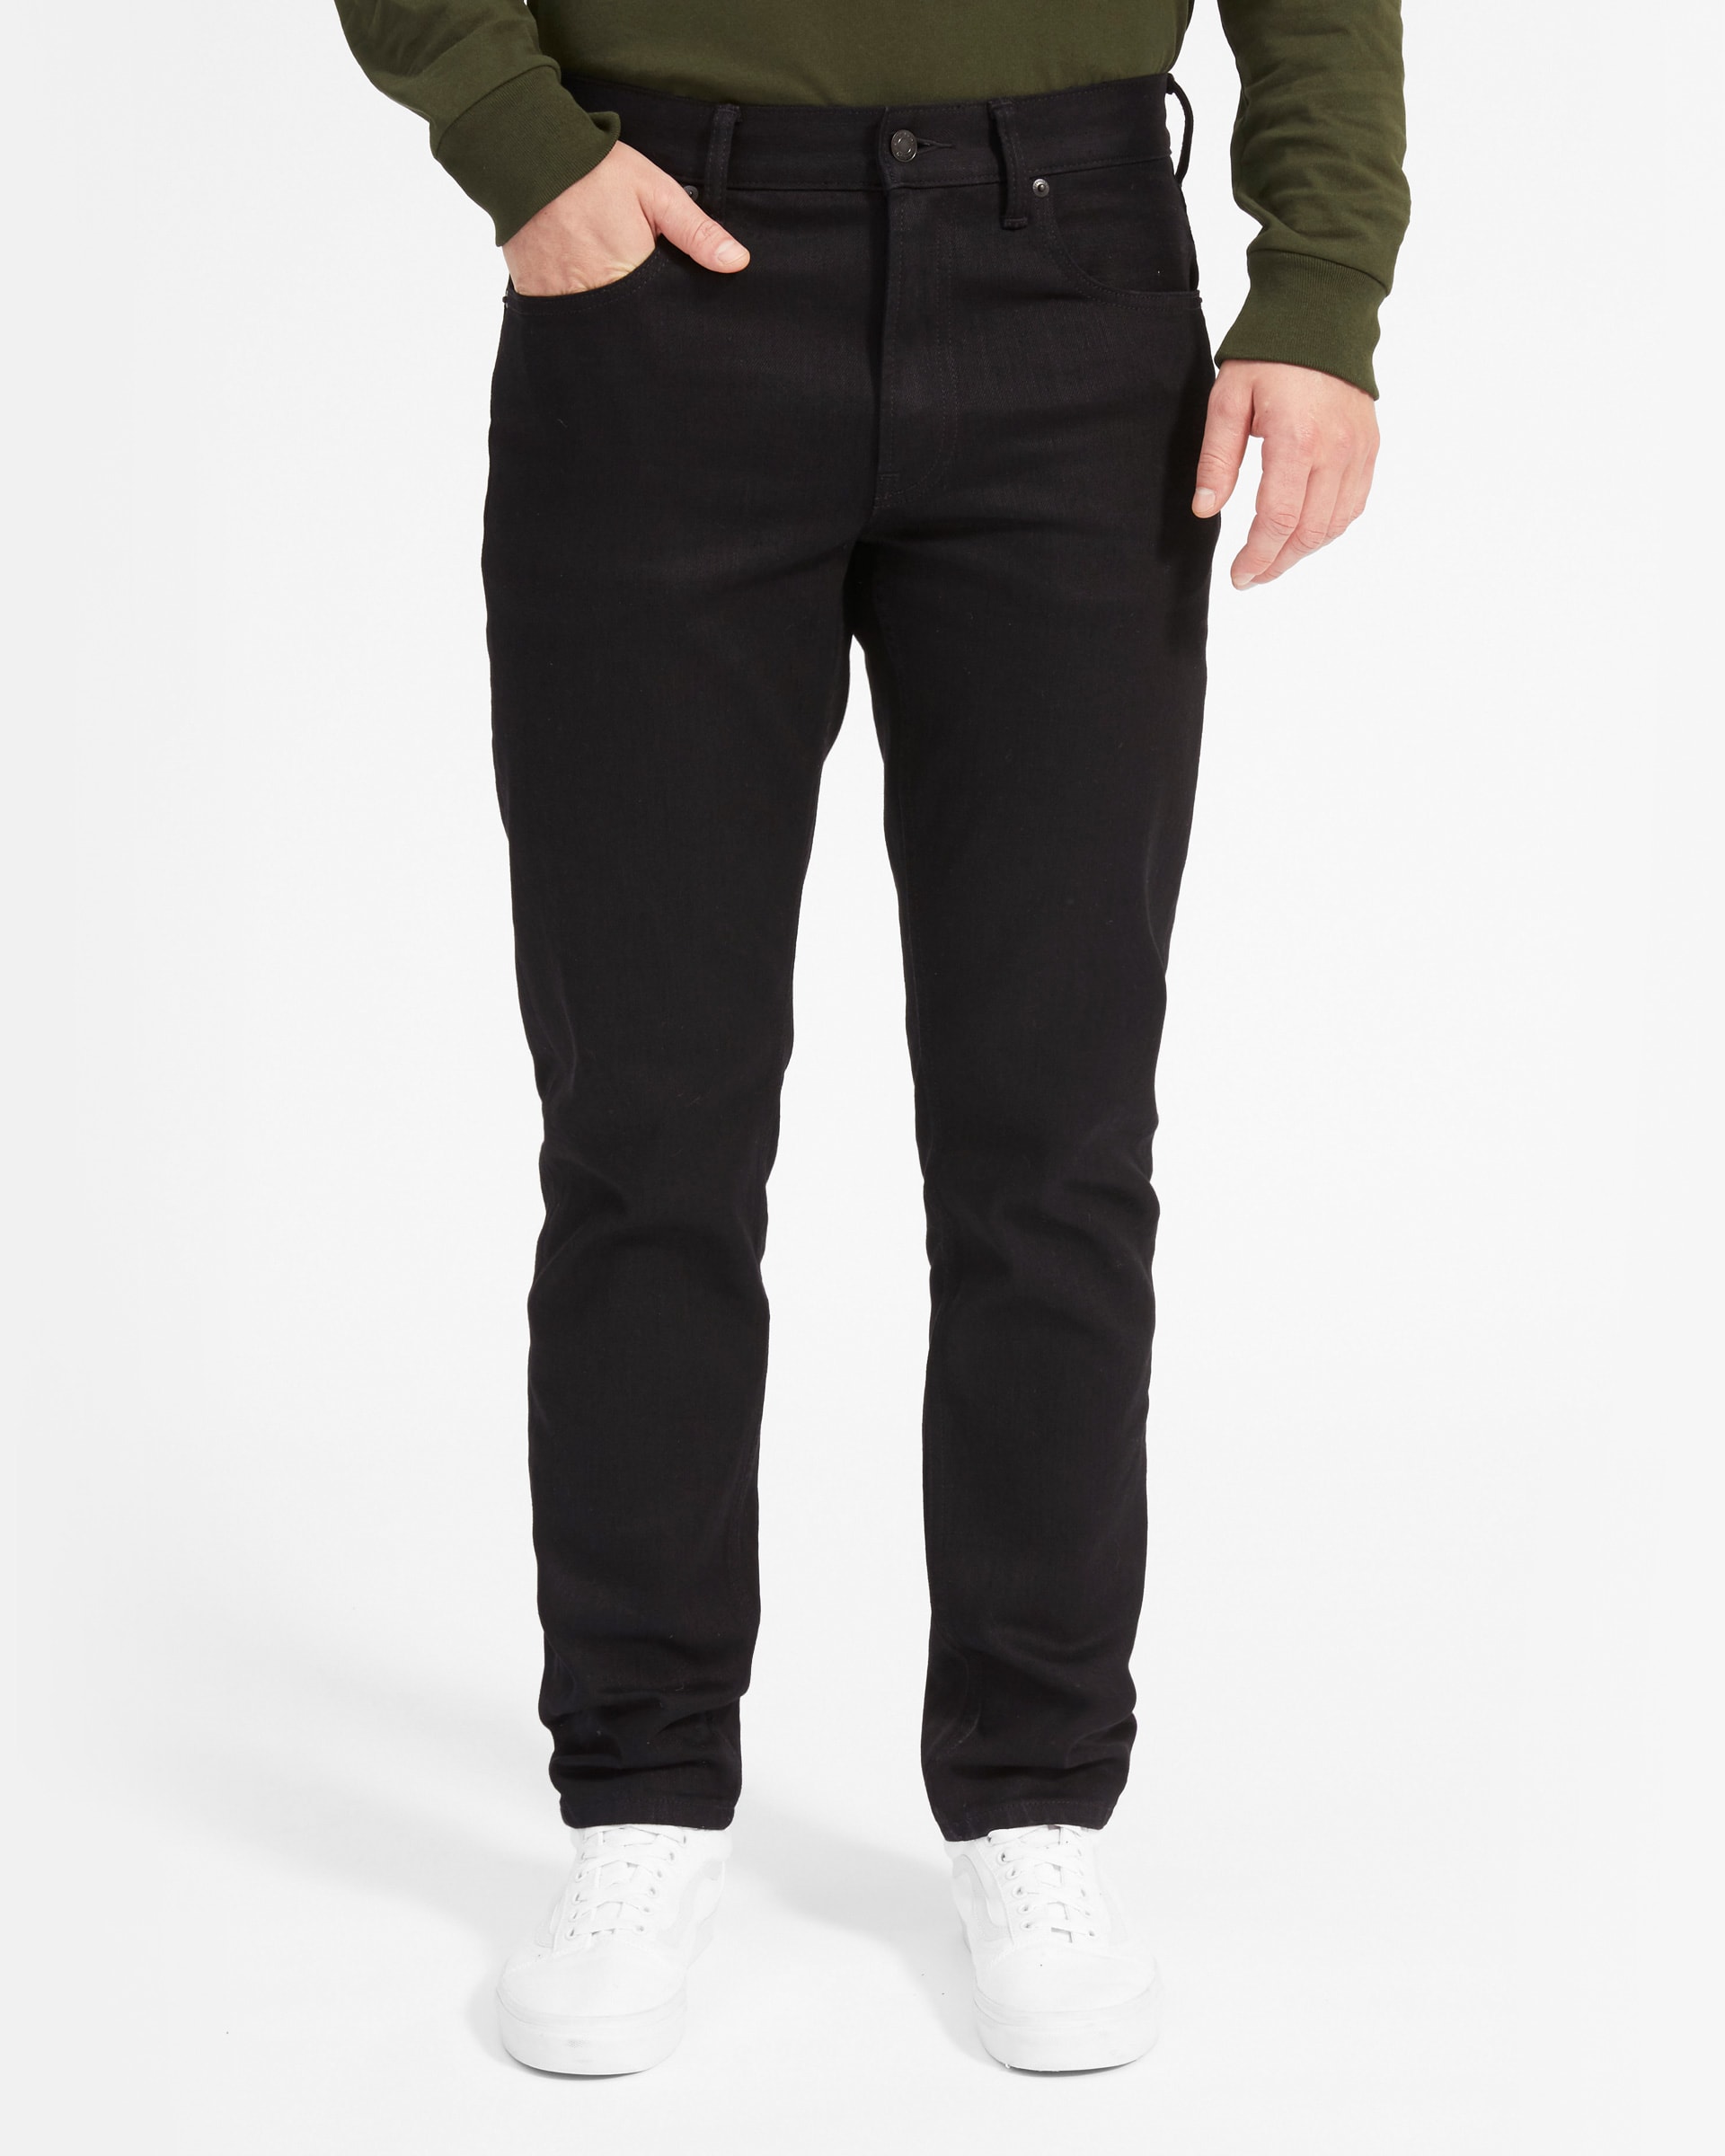 The Athletic Fit Jean Black – Everlane